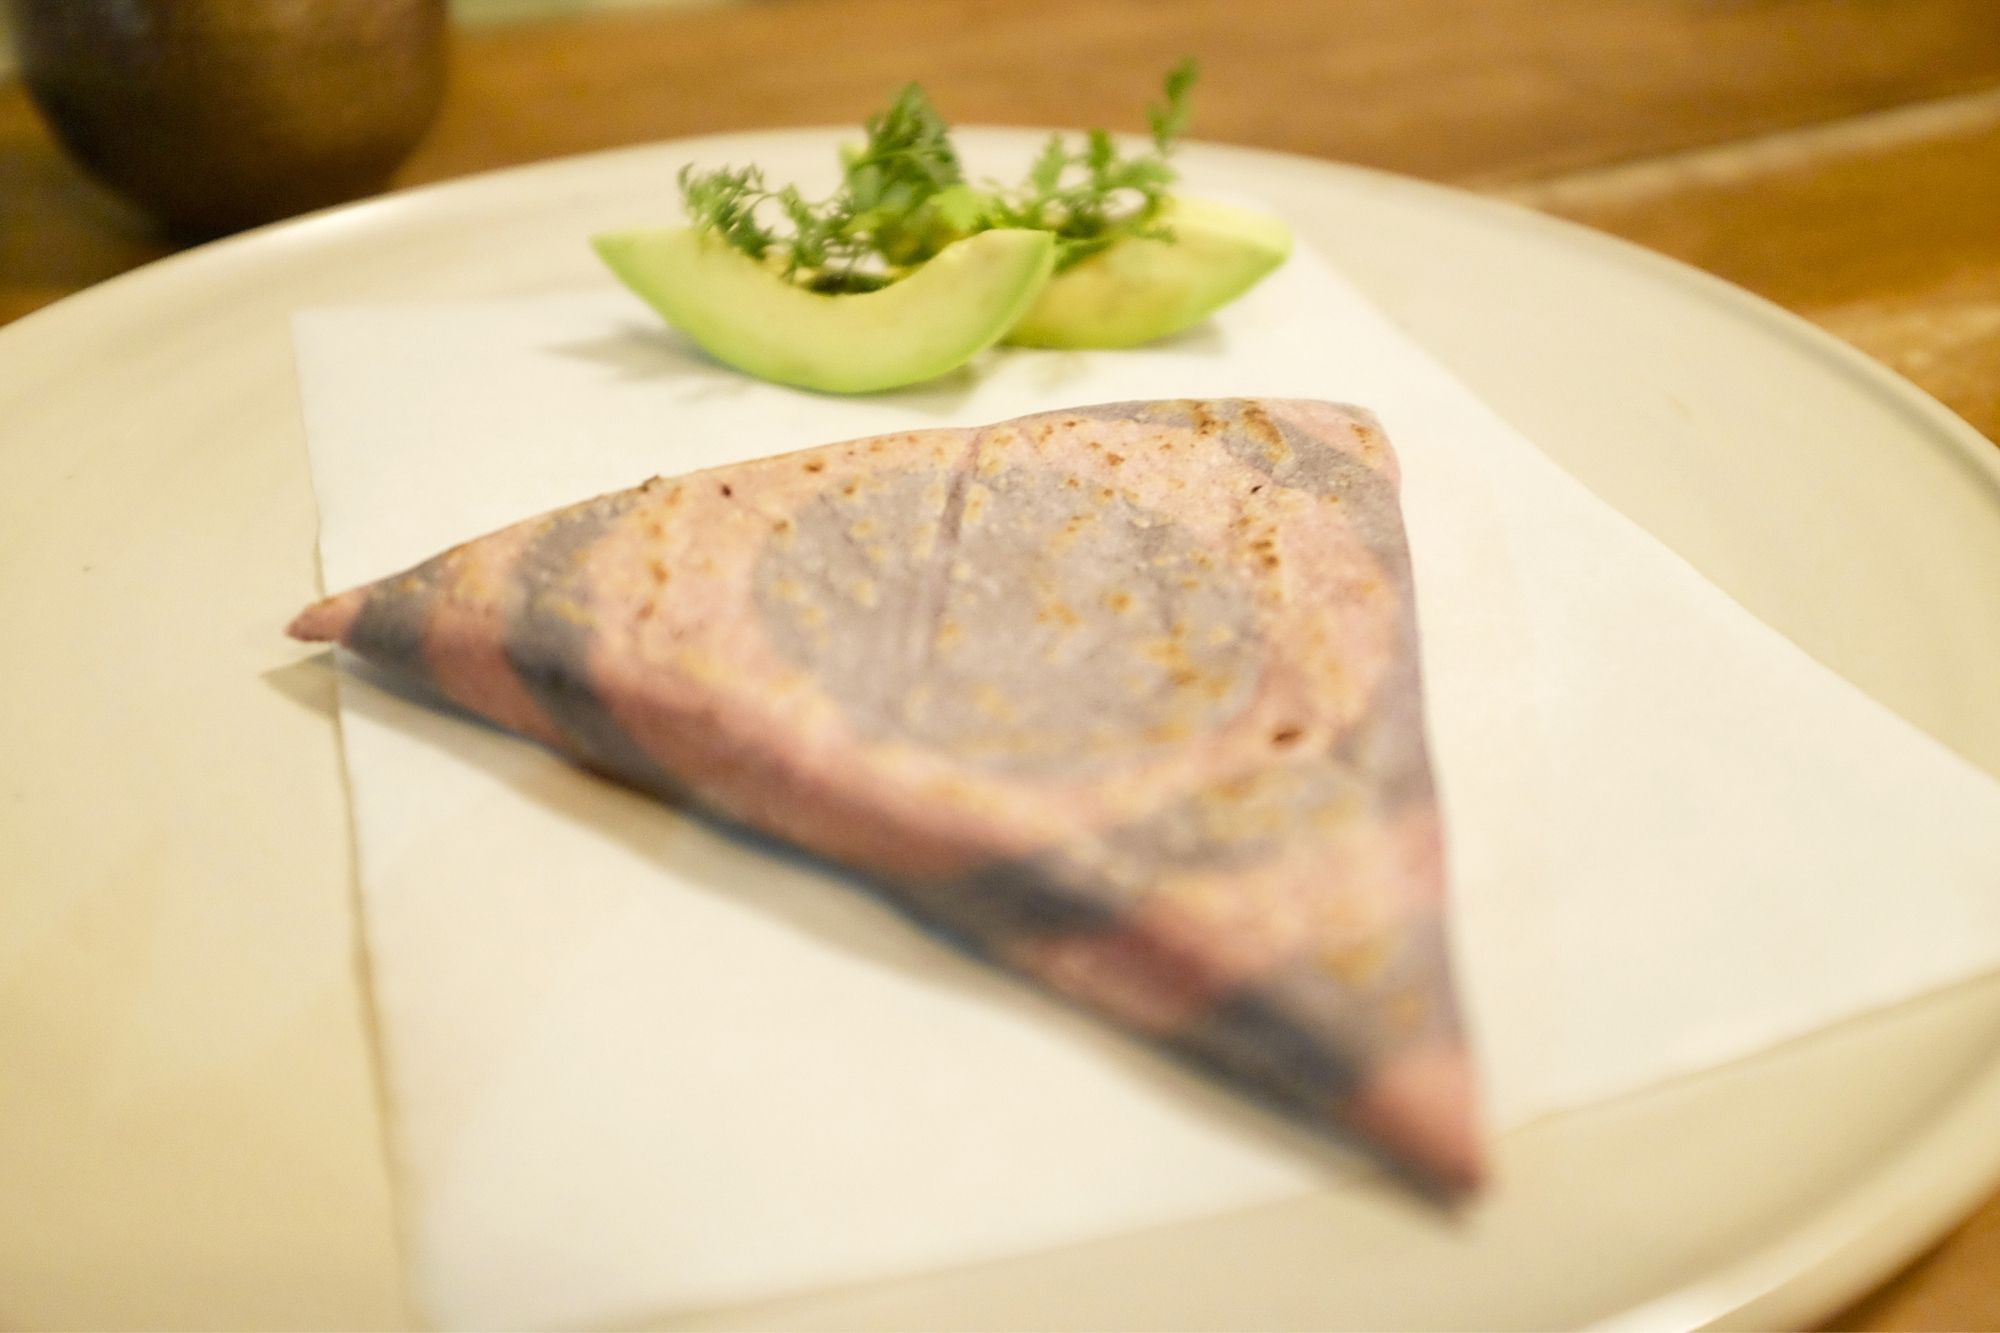 A triangle-shaped piece of masa decorated with rings of pink and purple in the center, and two avocado slices